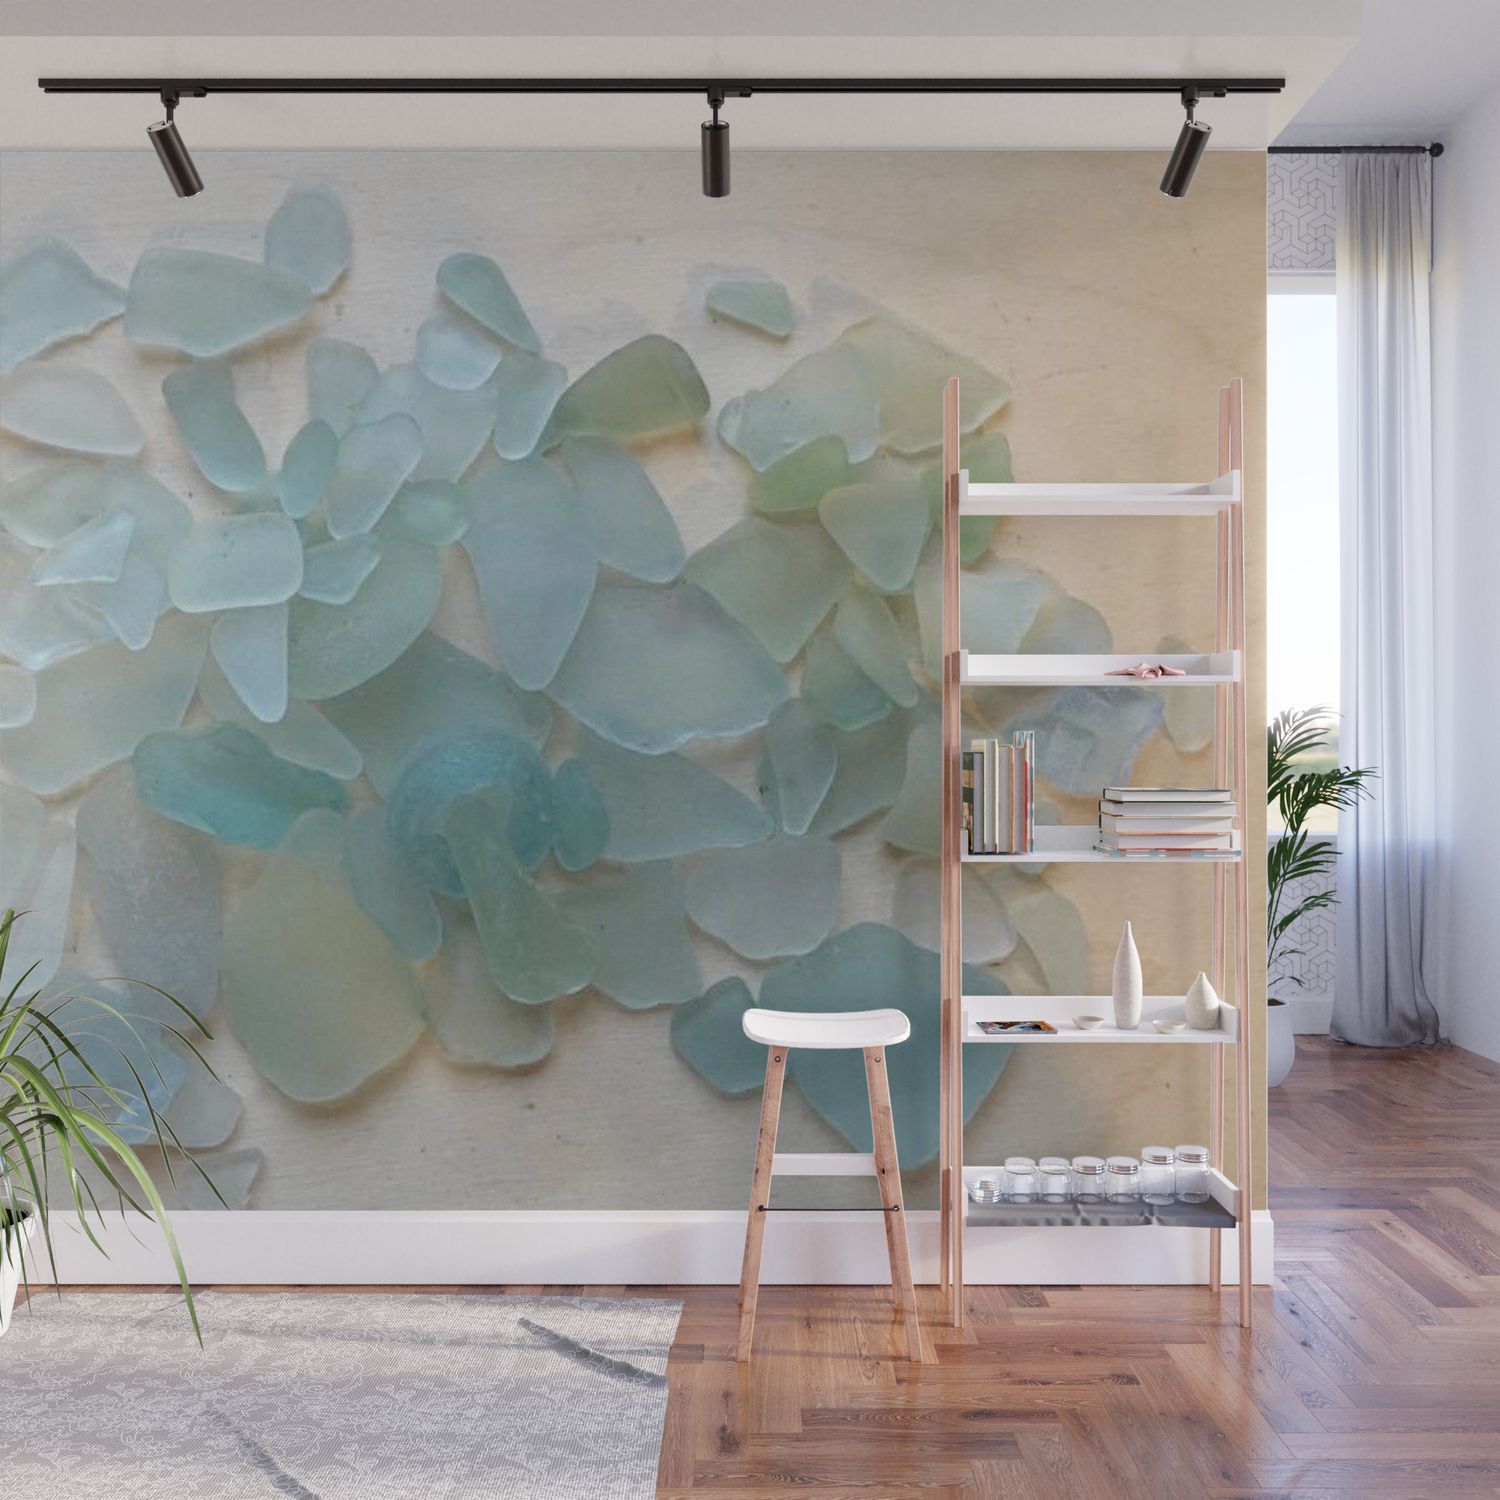 Ocean Hue Sea Glass Wall Muralcoastal Whims | Society6 Intended For Ocean Hue Wall Art (View 2 of 15)